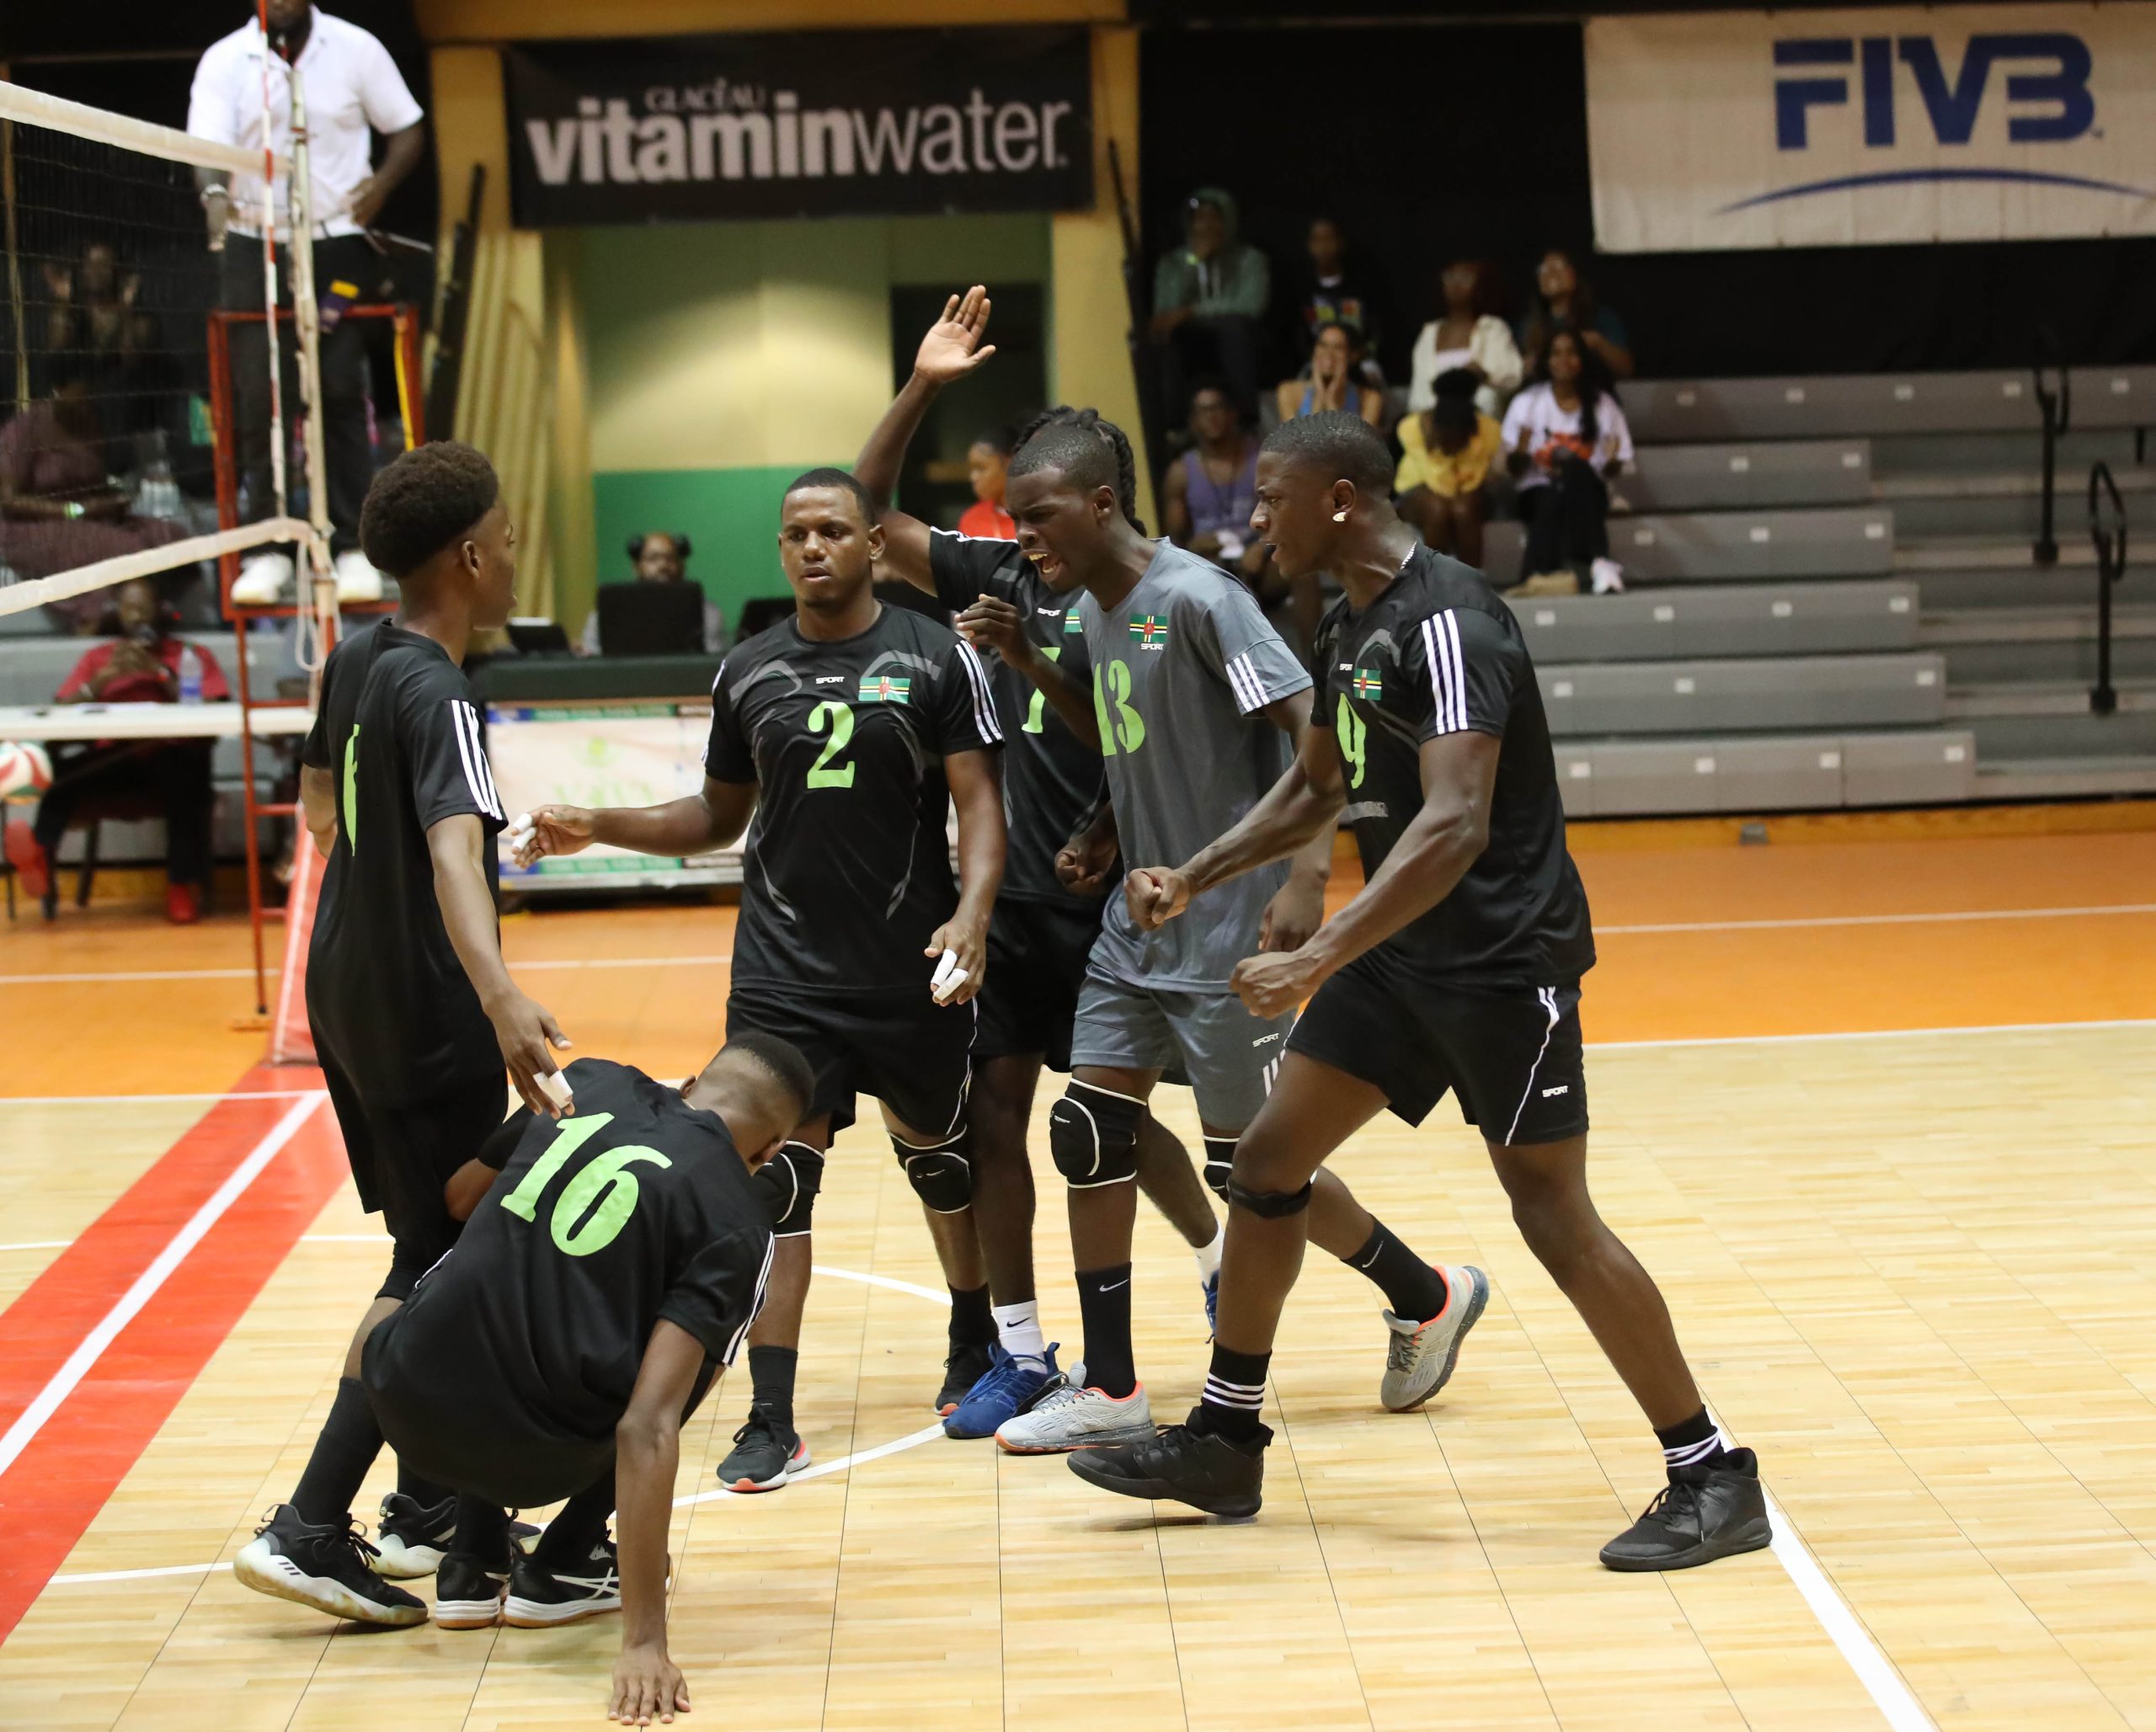 Dominica comes out victorious in match 1 of the ECVA U23 Male Championship